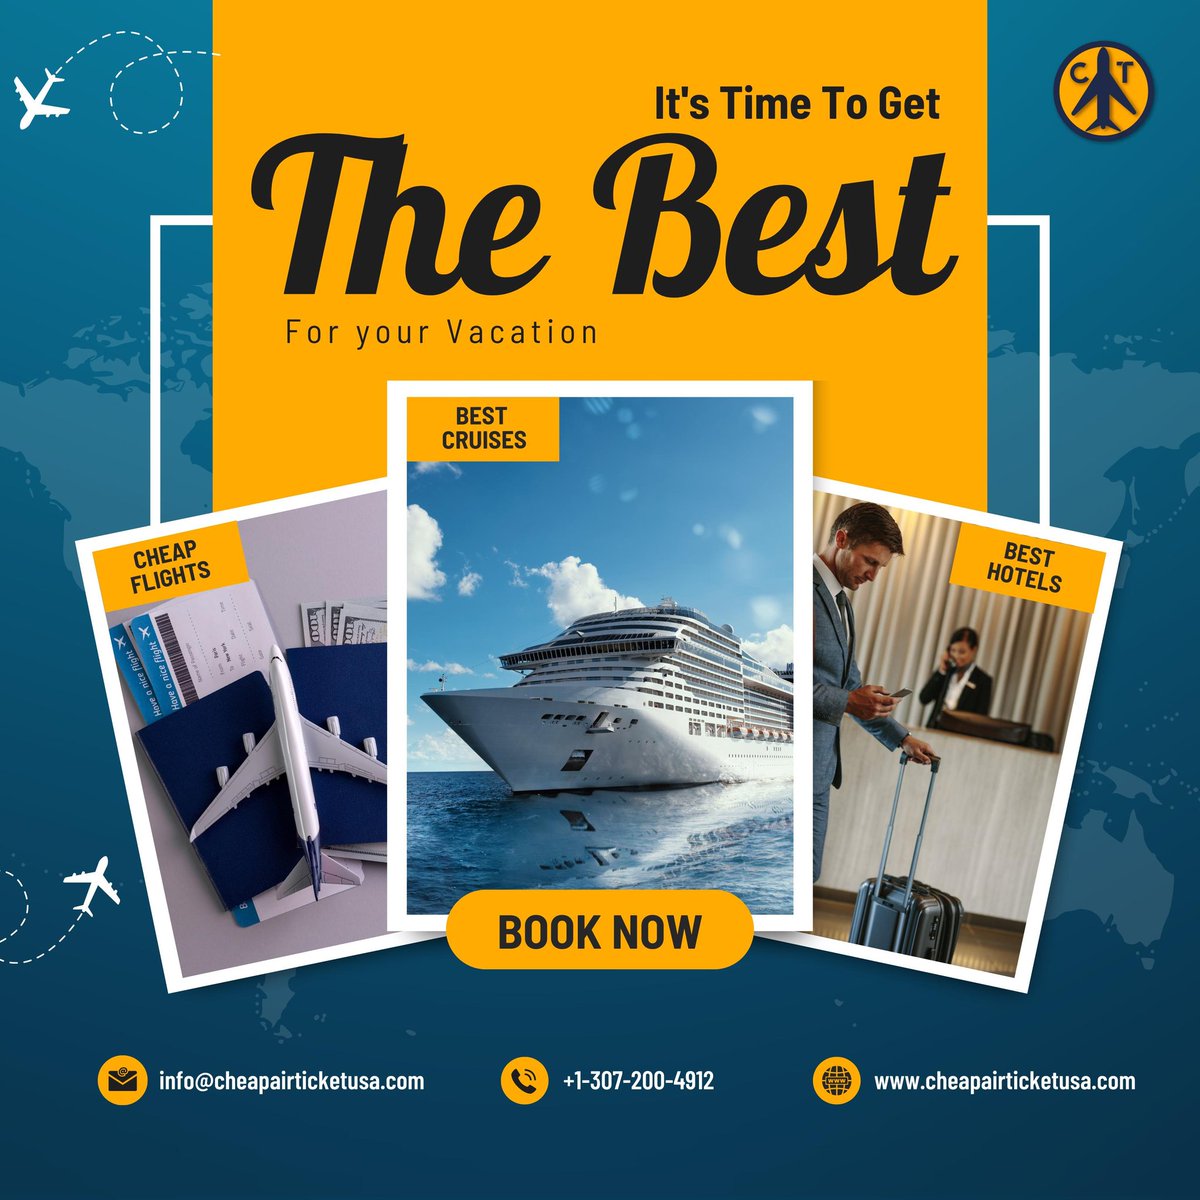 Unlock Unbeatable Travel Services with CheapAirTicketUSA! From cheap flights and luxurious cruises to top-rated hotels, we offer everything you need for a perfect getaway. Book now and travel smart!
#CheapAirTicketUSA #TravelServices #CheapFlights #BestCruises #TopHotels